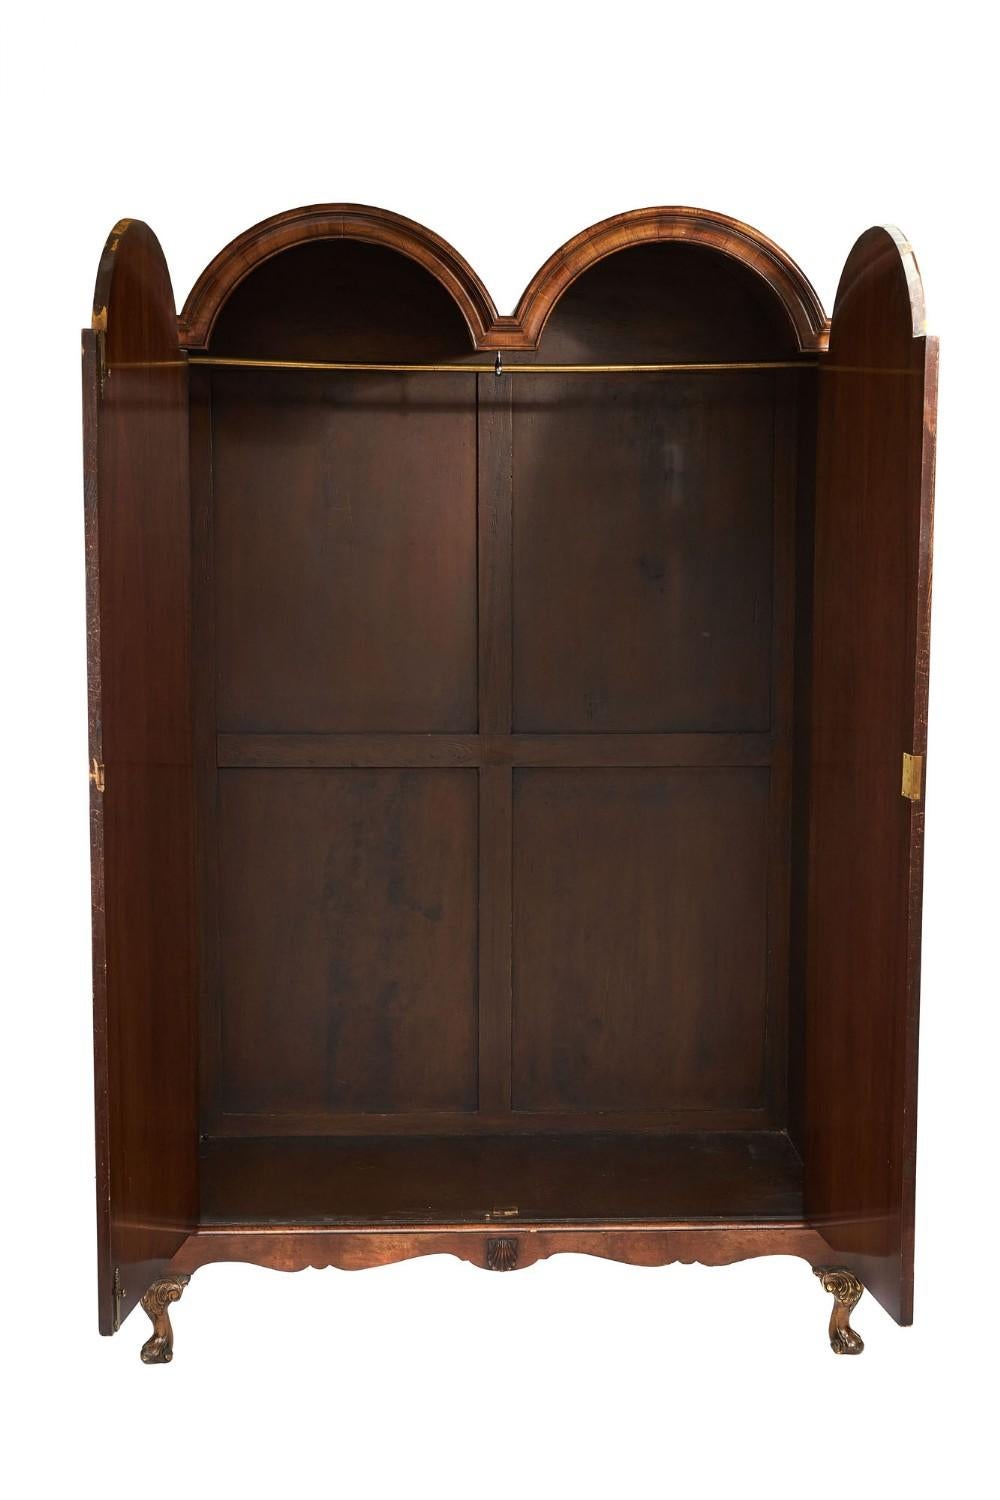 English Antique Quality Burr Walnut Two Door Double Dome Wardrobe